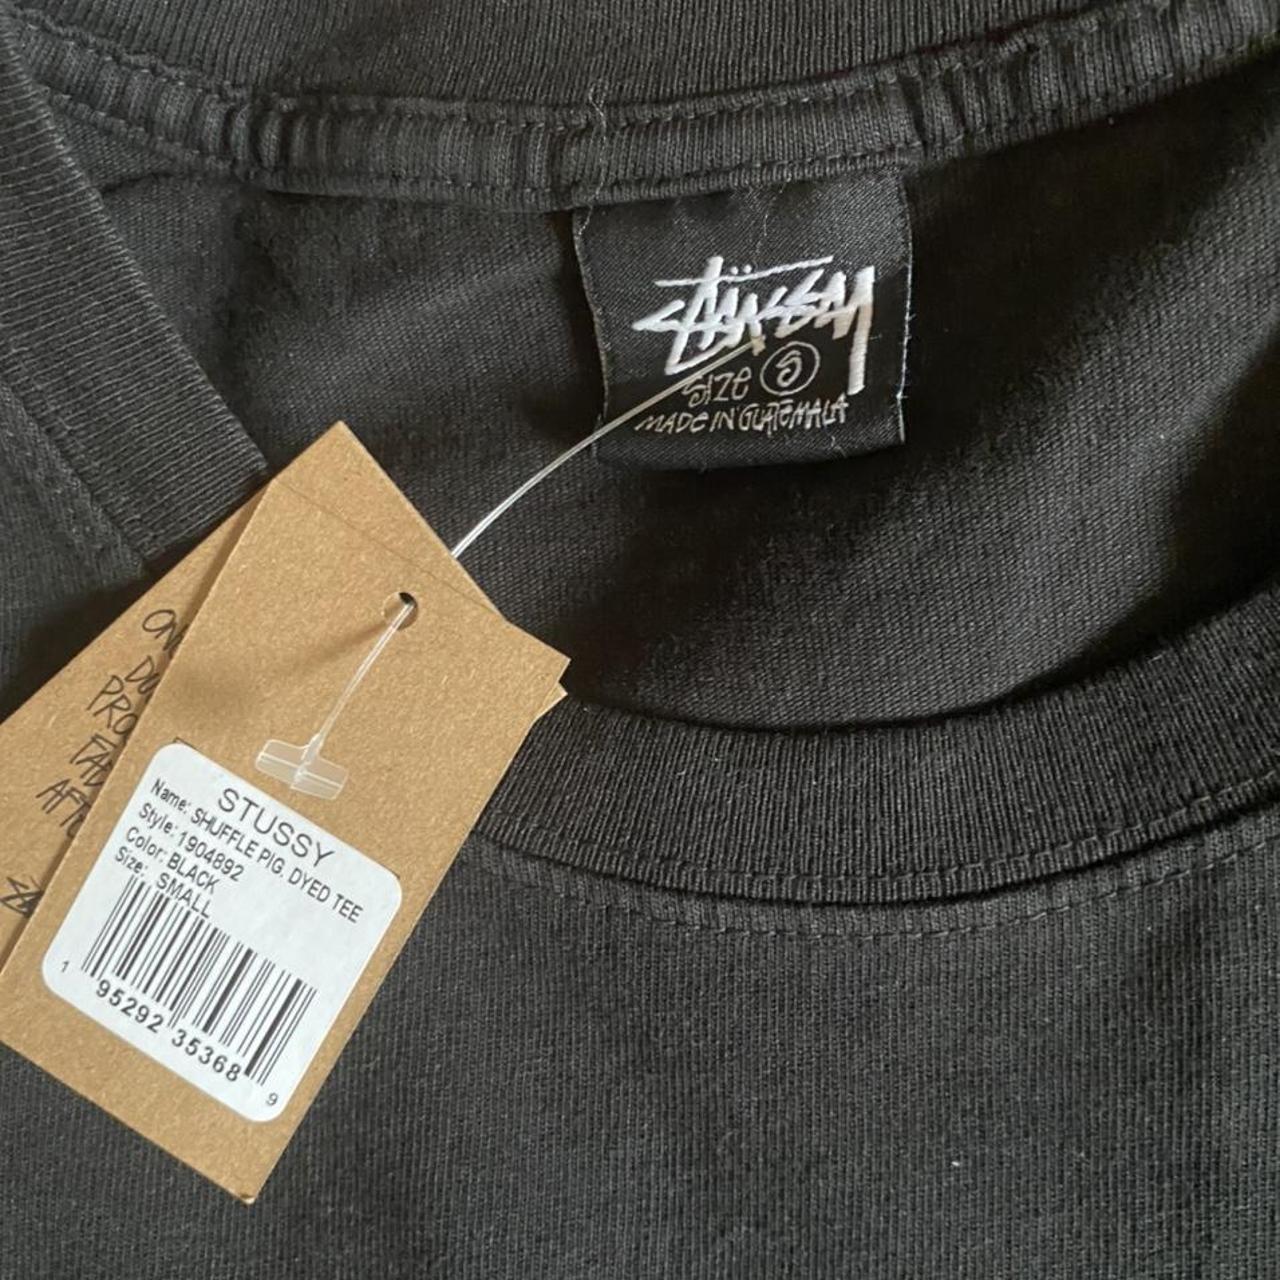 Brand New Stussy shuffle diced tee top with tags on... - Depop